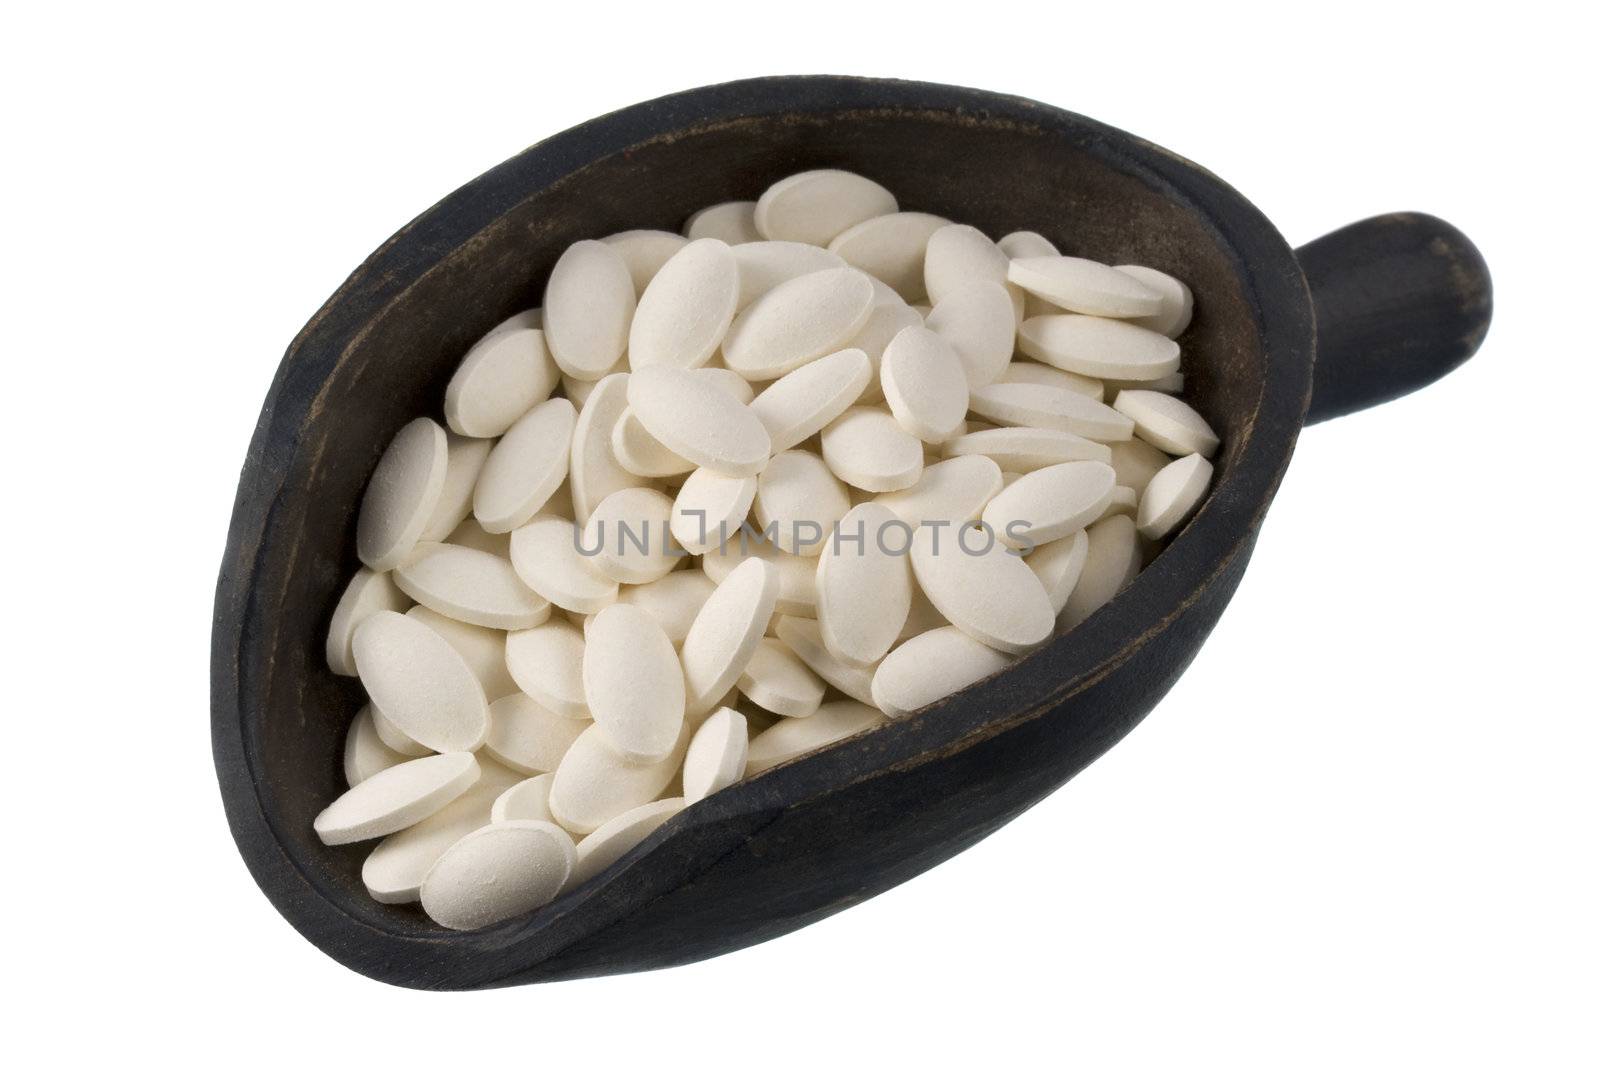 white pills of dietary supplement (papaya enzyme) on a rustic, wooden scoop, isolated on white